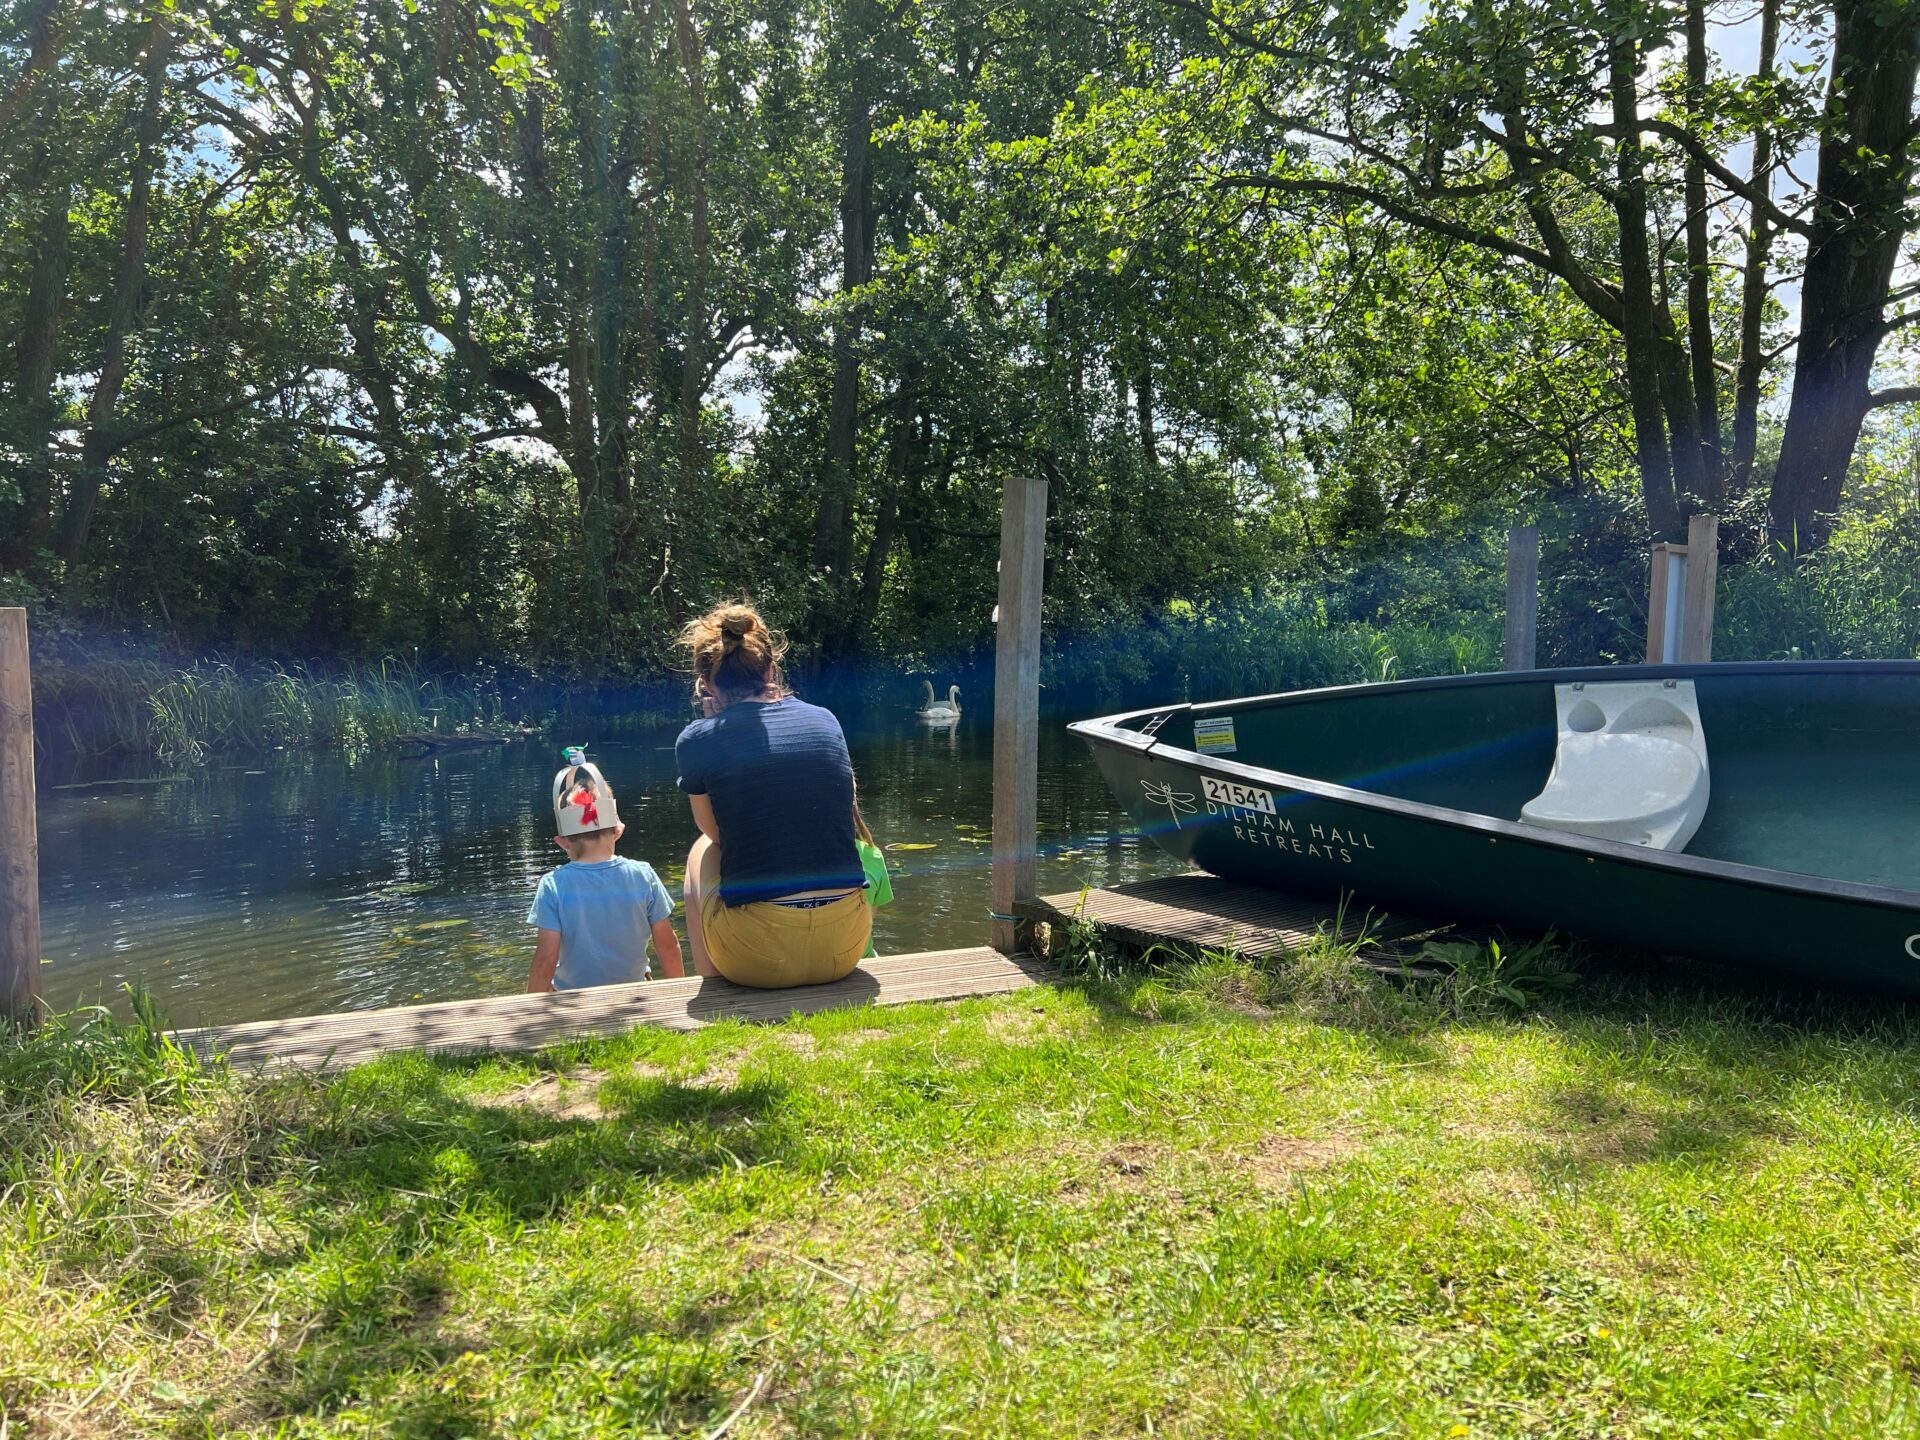 Dilham Hall Retreats family holiday dilham hall canoe hire canadian canoe kayak private canal norfolk broads broad fen dilham hall retreats  couples norfolk broads dilham hall retreats luxury canoe hire nature 